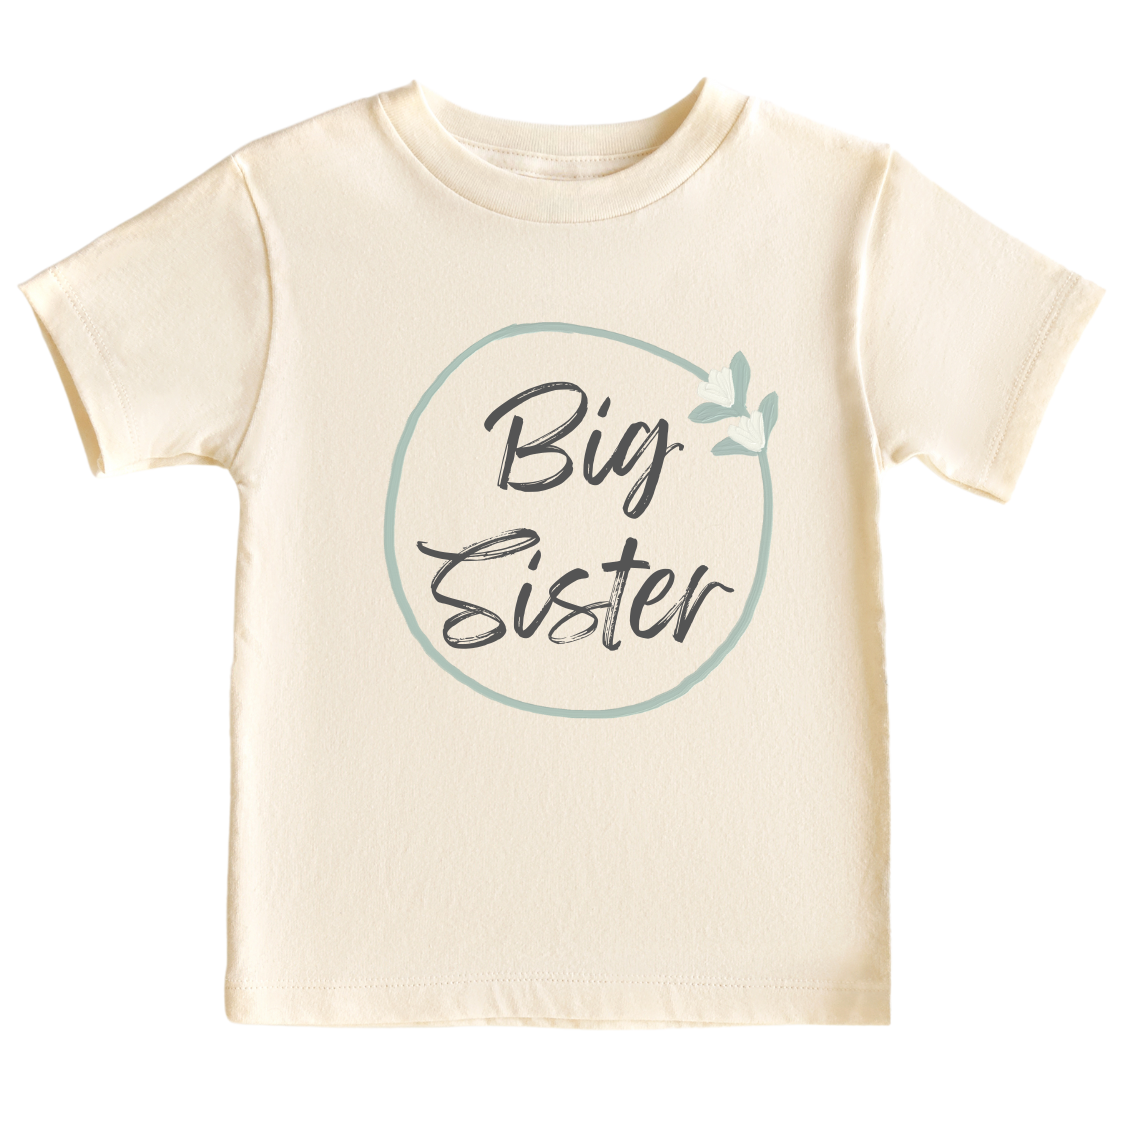 Natural kid's t-shirt with a minimalistic printed graphic of a pastel green floral wreath and the text 'Big Sister.' This delightful t-shirt celebrates the exciting role of a big sister.